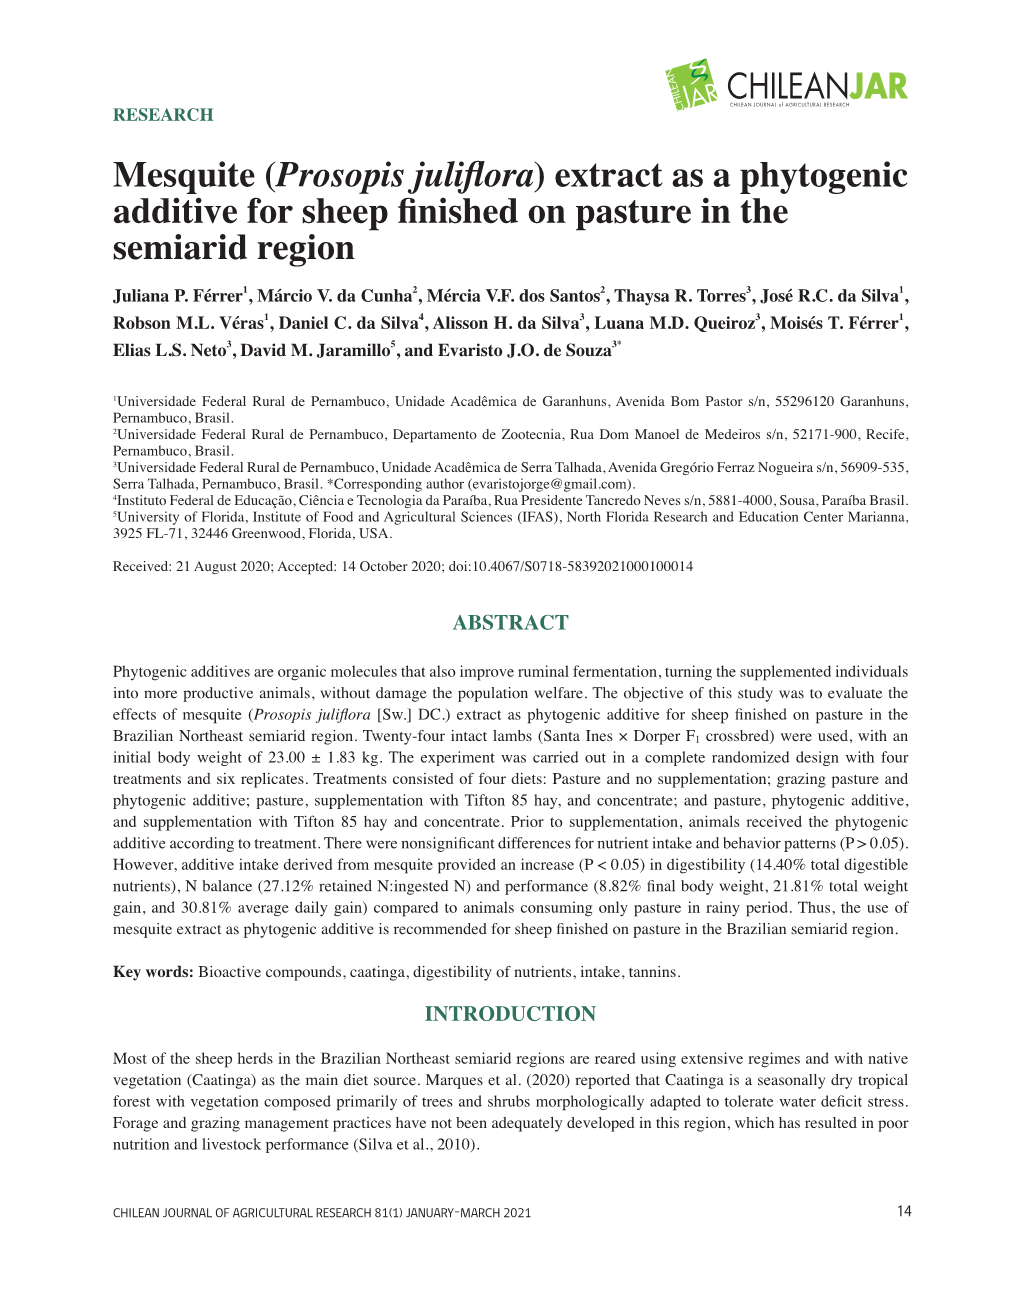 Mesquite (Prosopis Juliflora) Extract As a Phytogenic Additive for Sheep Finished on Pasture in the Semiarid Region Juliana P